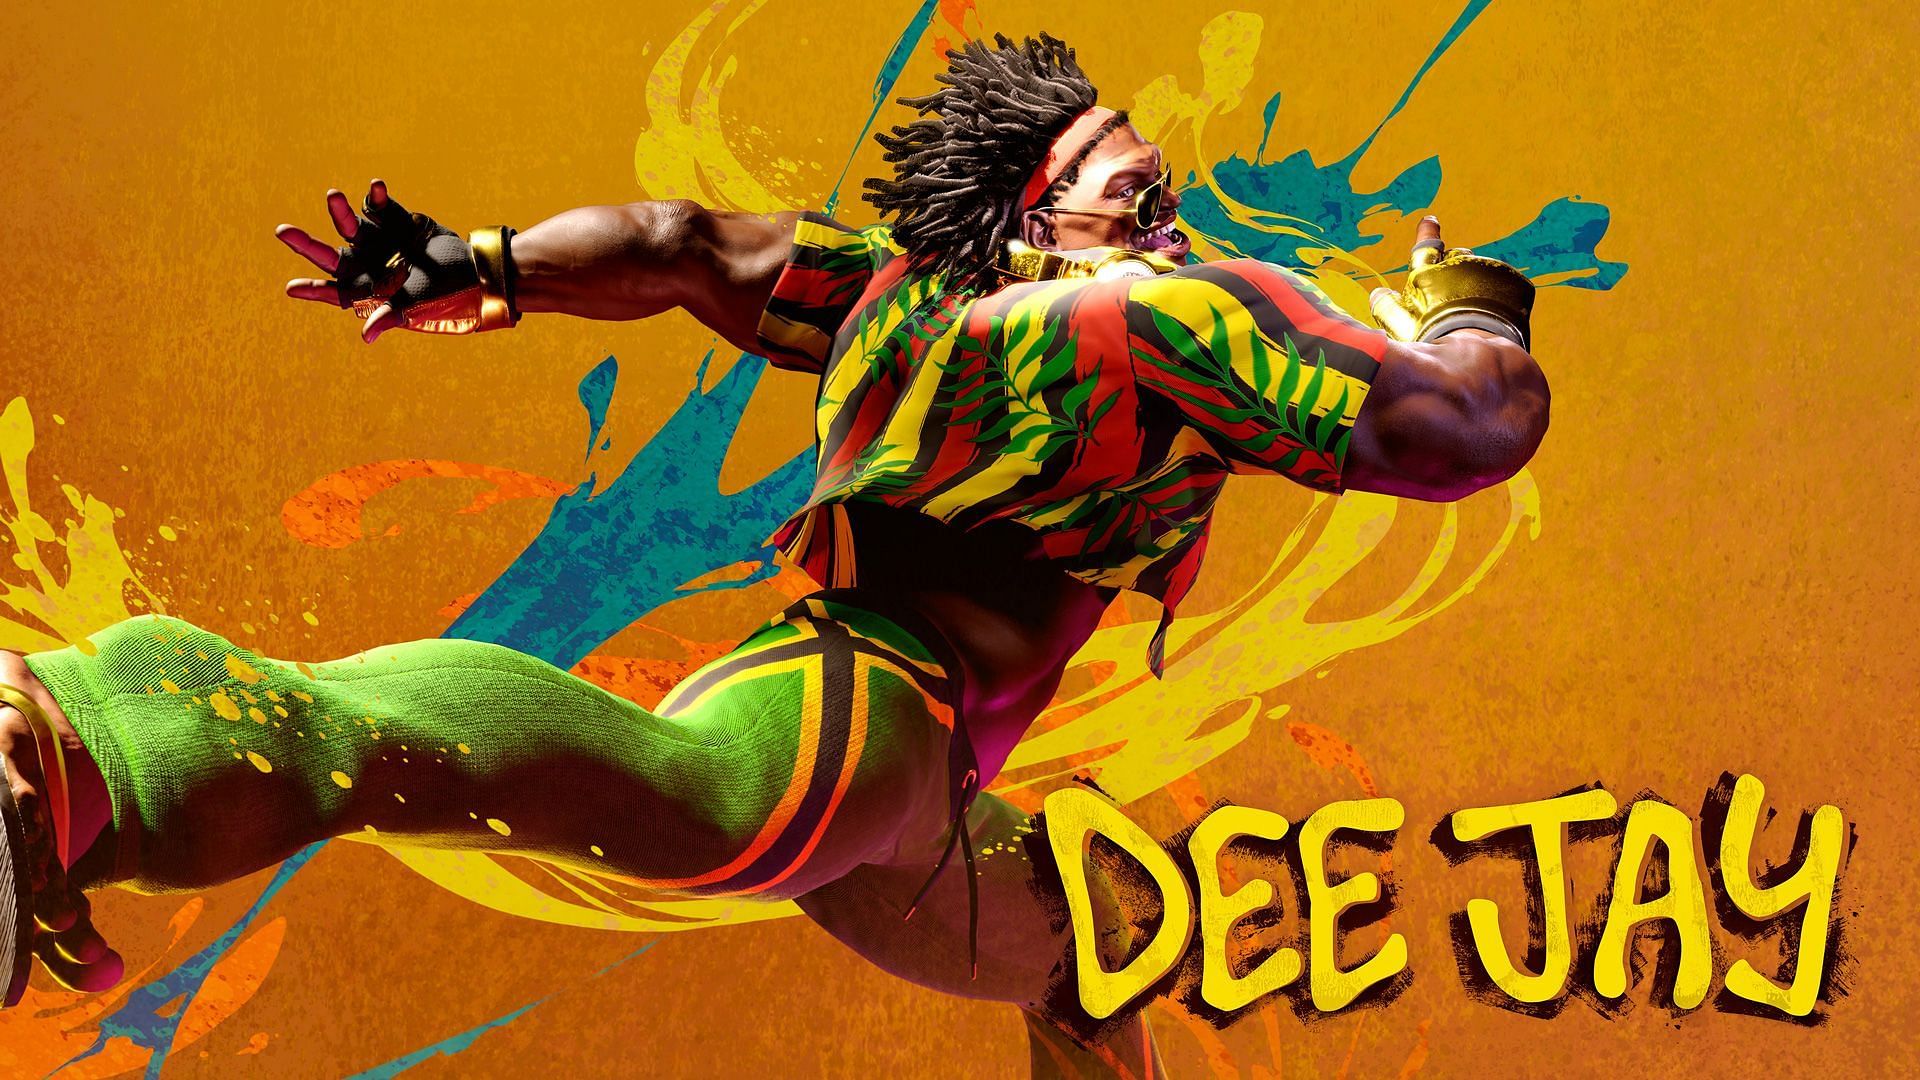 Dee Jay is an extremely upbeat character filled with positivity (Image via Street Fighter)